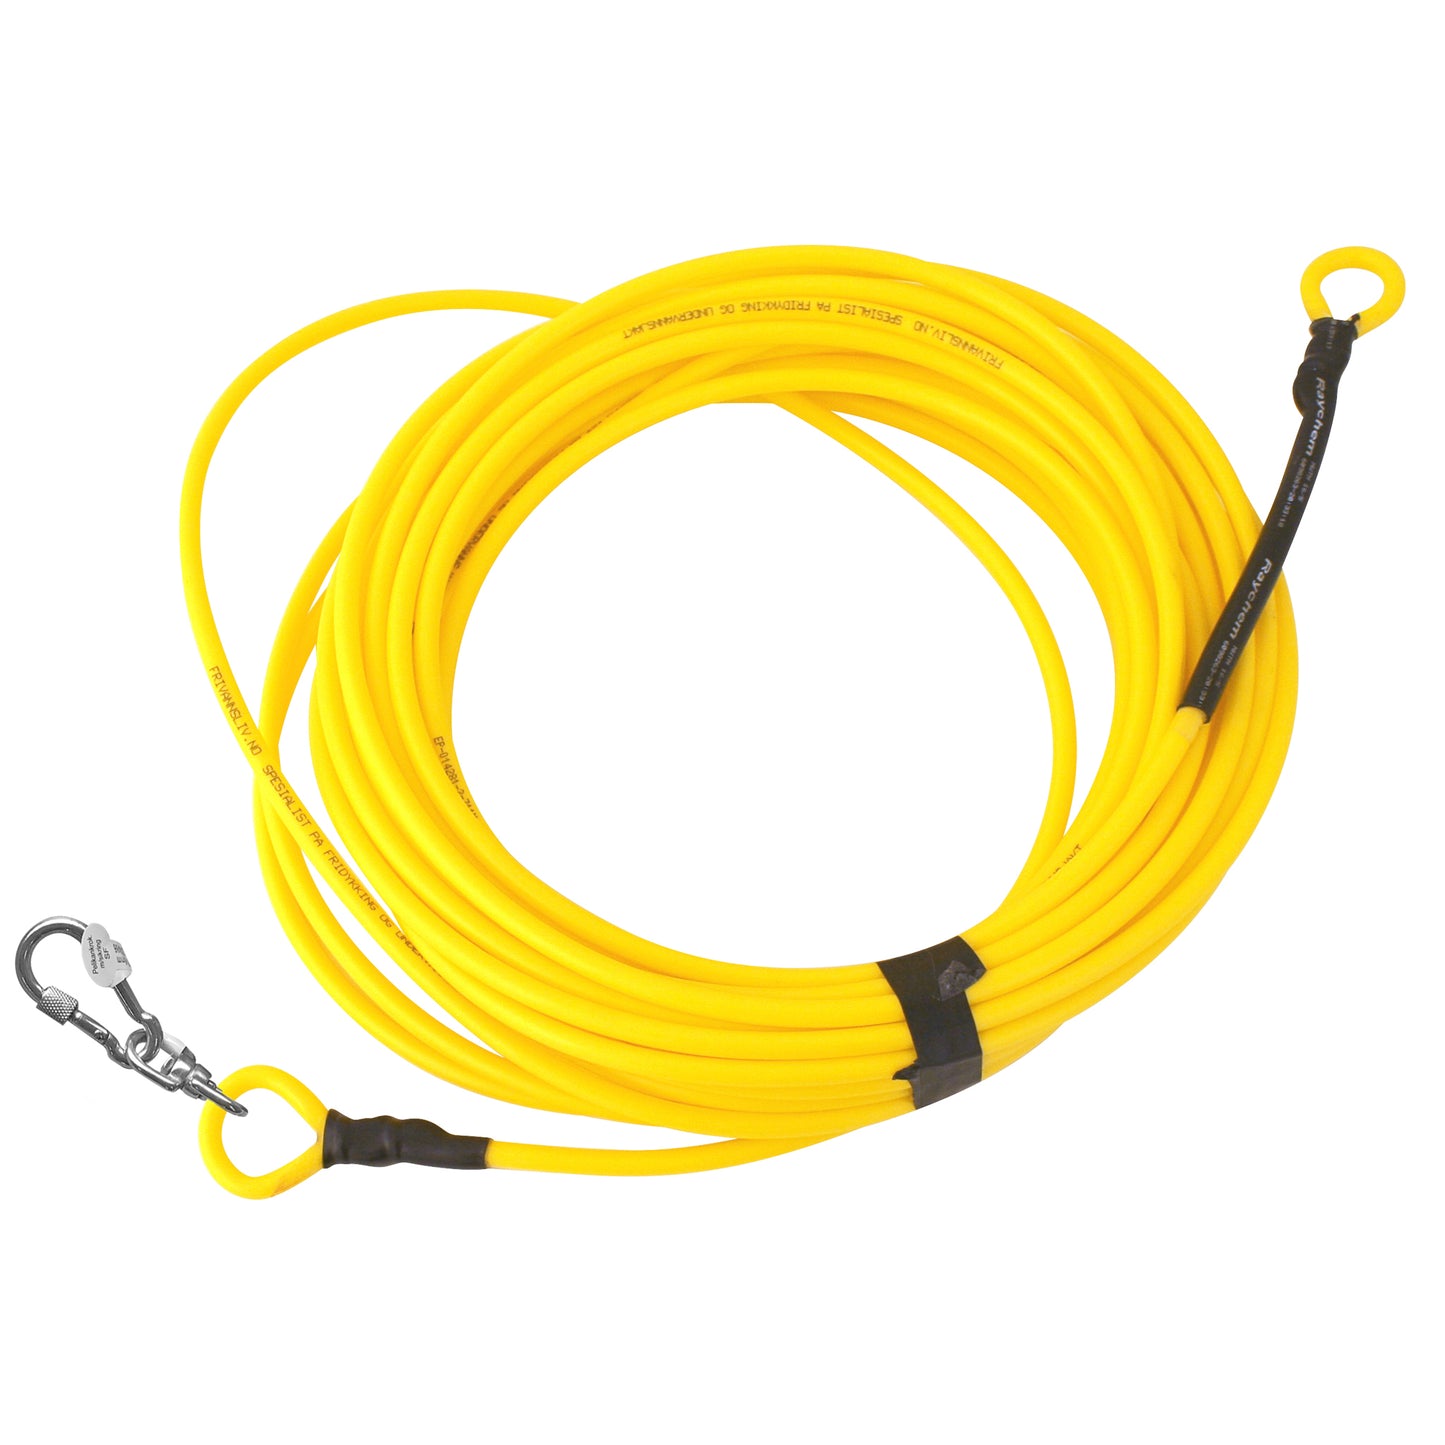 Frivannsliv® fishing and freediving line signal yellow